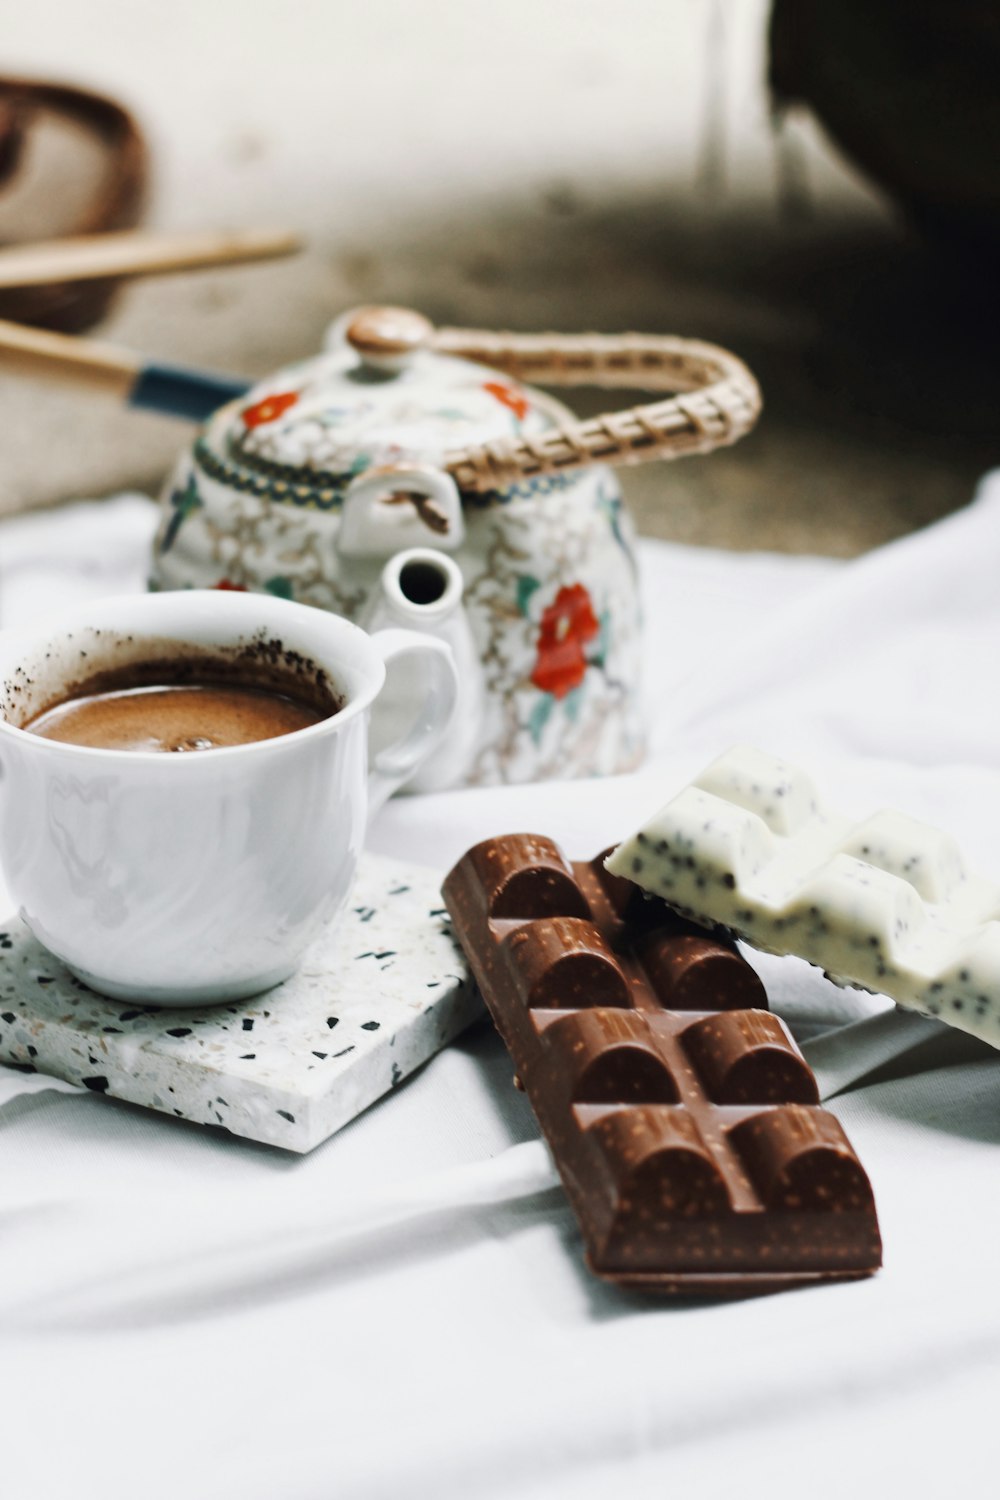 white ceramic cup with coffee beside chocolate bar on white ceramic plate